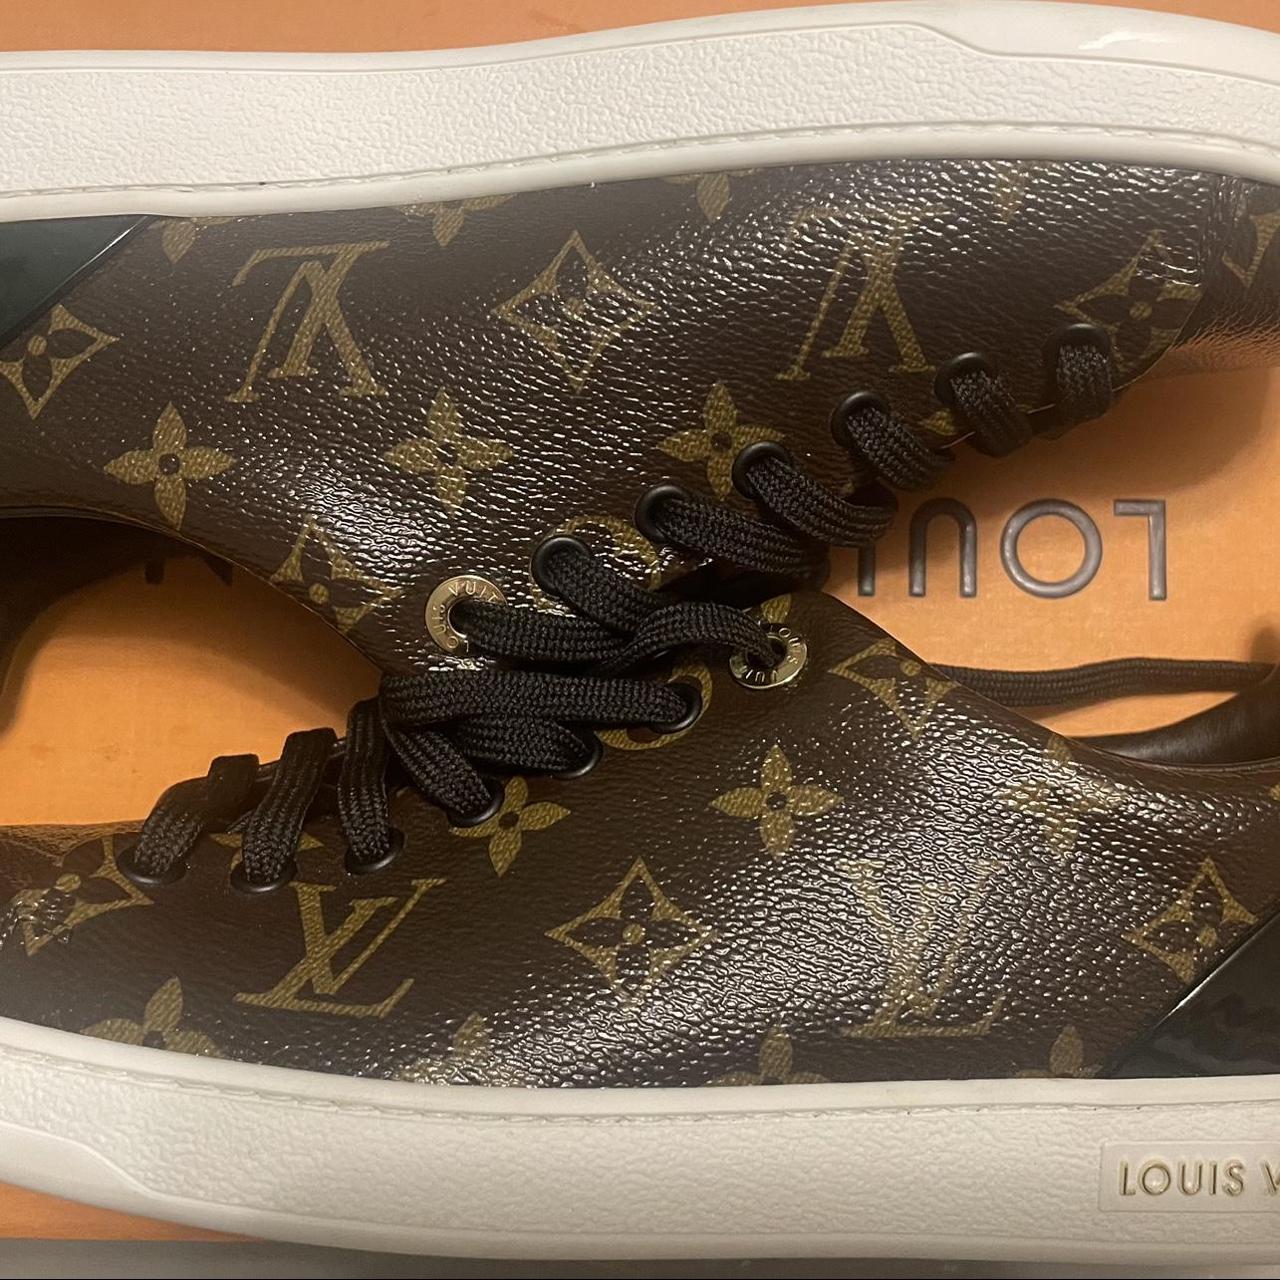 Louis Vuitton trainers Uk 11 Rare SOLD OUT - Depop